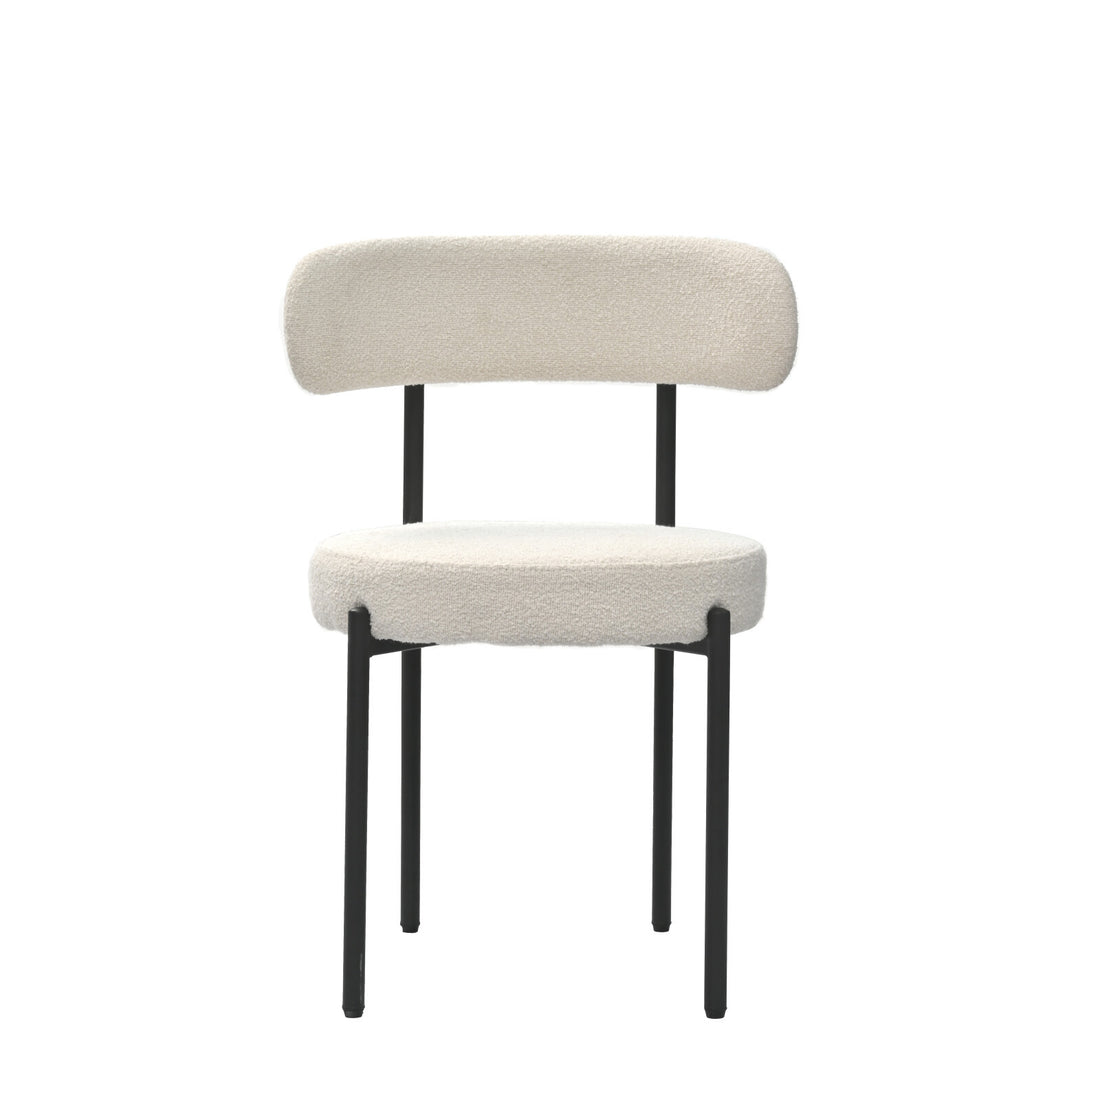 White Boucle Dining Chairs Set of 2,Mid Century Modern metal-white-dining room-round-modern-banquet